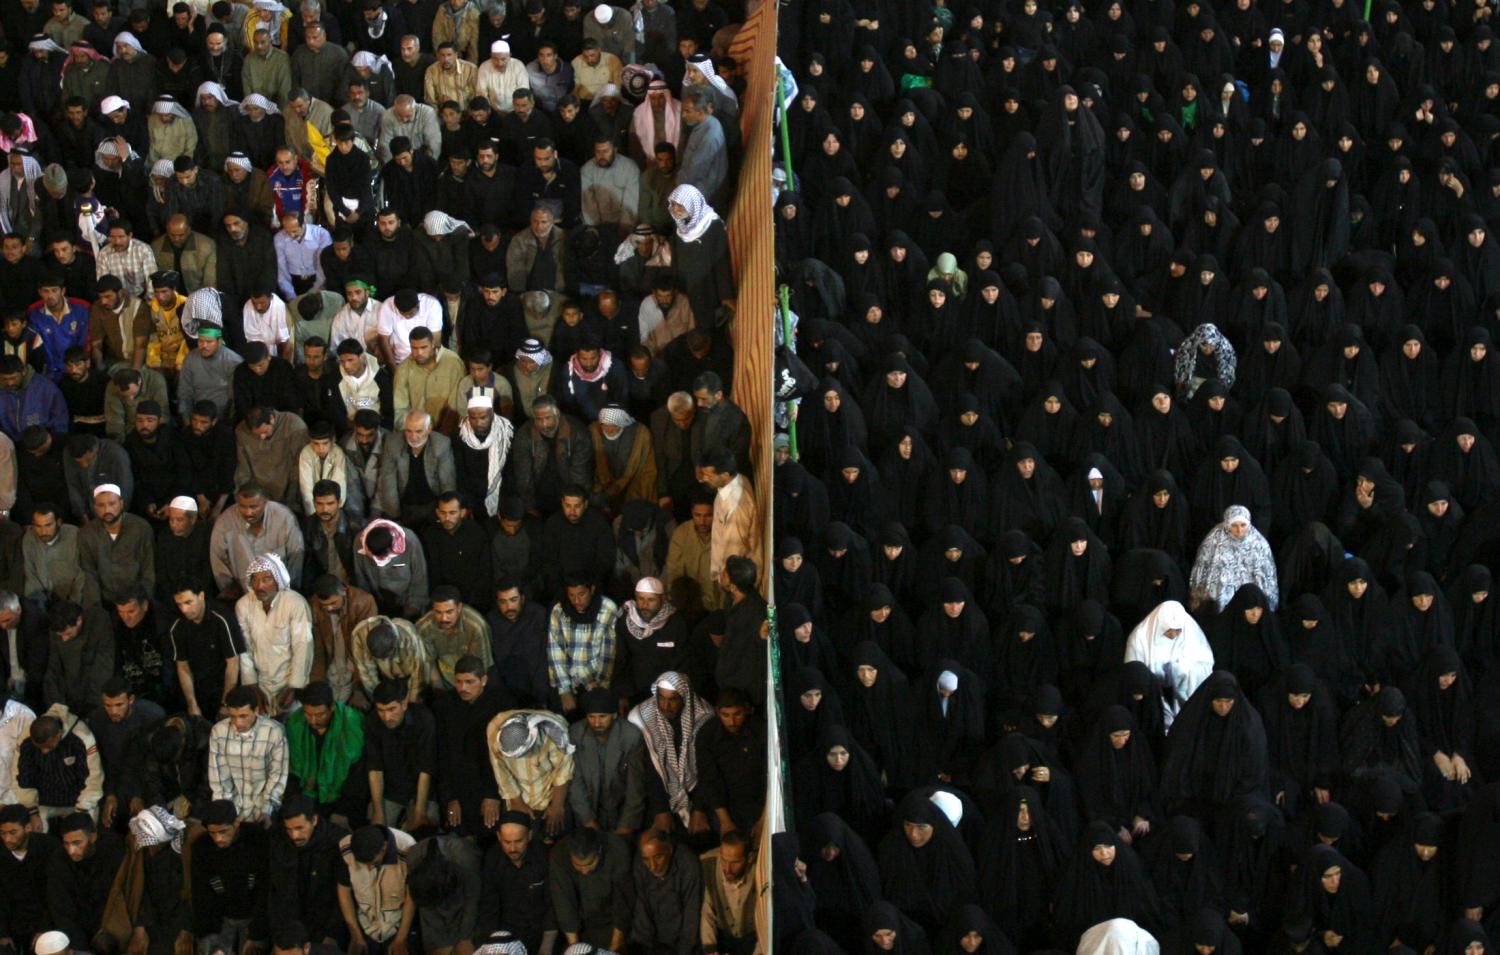 Male and female pilgrims are separated by a barrier as they pray at the Imam Hussein shrine during the Arbain religious event in the holy city of Kerbala, 110 km (70 miles) south of Baghdad March 8, 2007. More than a million Shi'ite Muslim pilgrims poured into Iraq 's holy city of Kerbala to mark Arbain, the end of a 40-day mourning period since Ashura, which marks the death of Prophet Mohammad's grandson Imam Hussein in 680AD.  REUTERS/Thaier al-Sudani (IRAQ) - GM1DUTSTBNAA